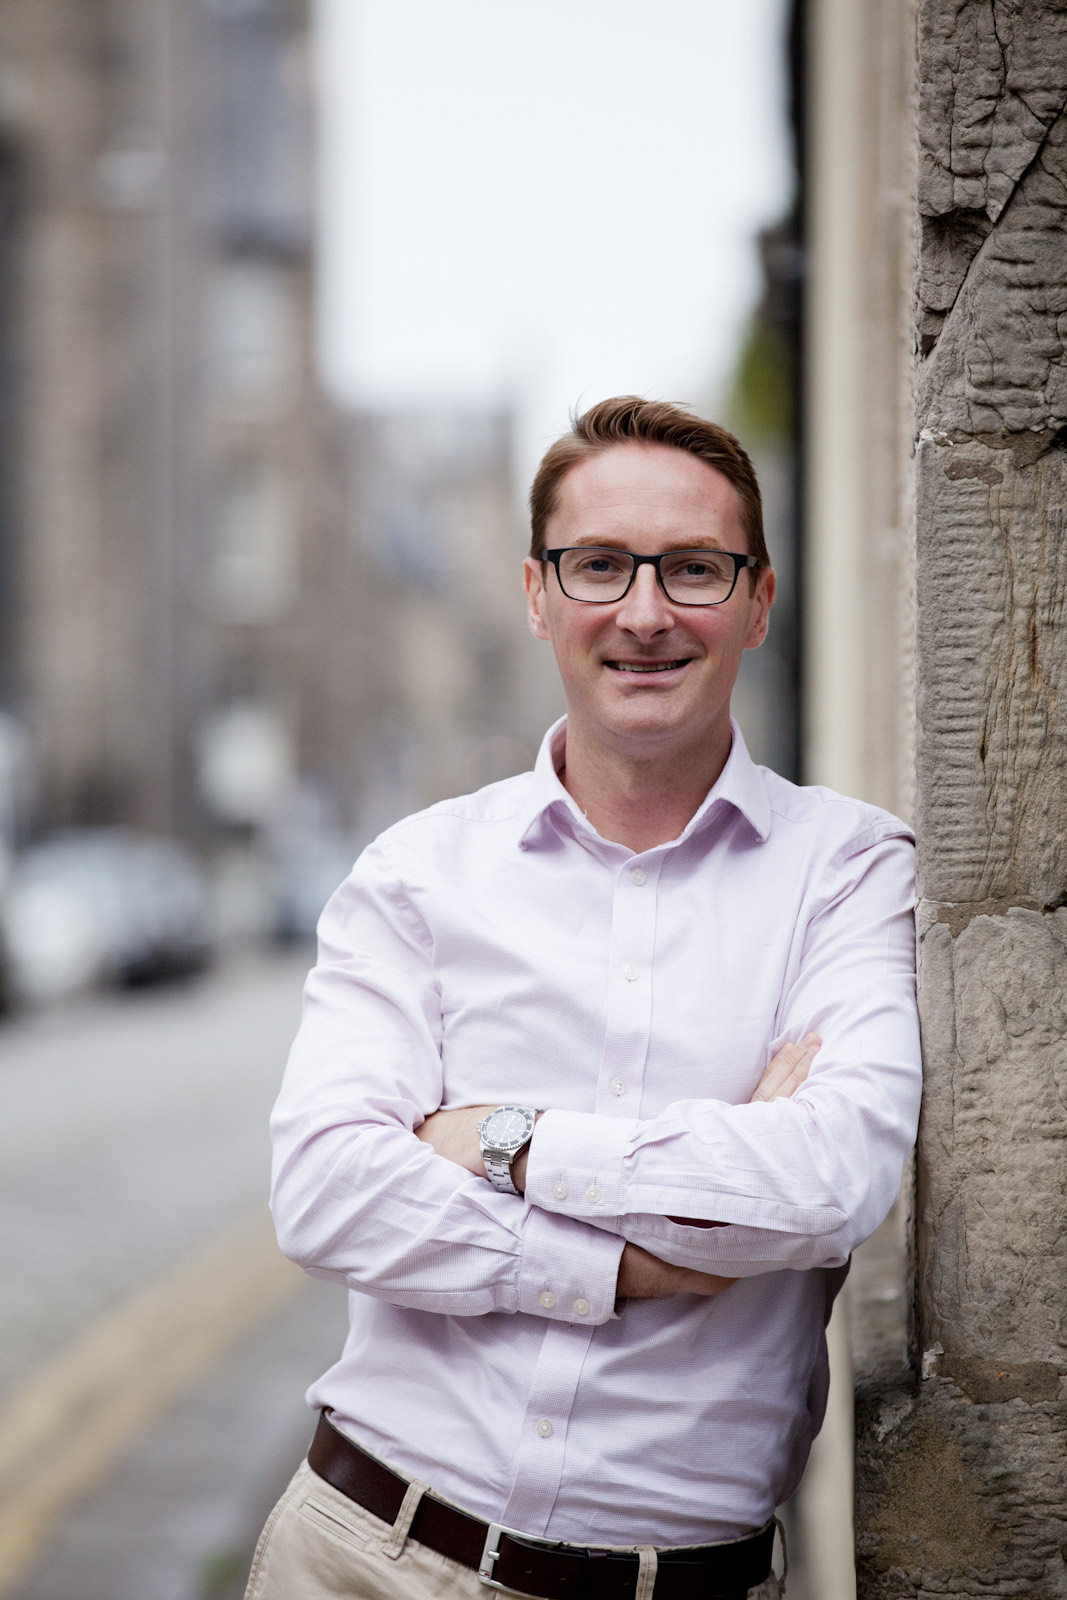 BGF invests almost £33 million in Scottish firms in first half of 2021